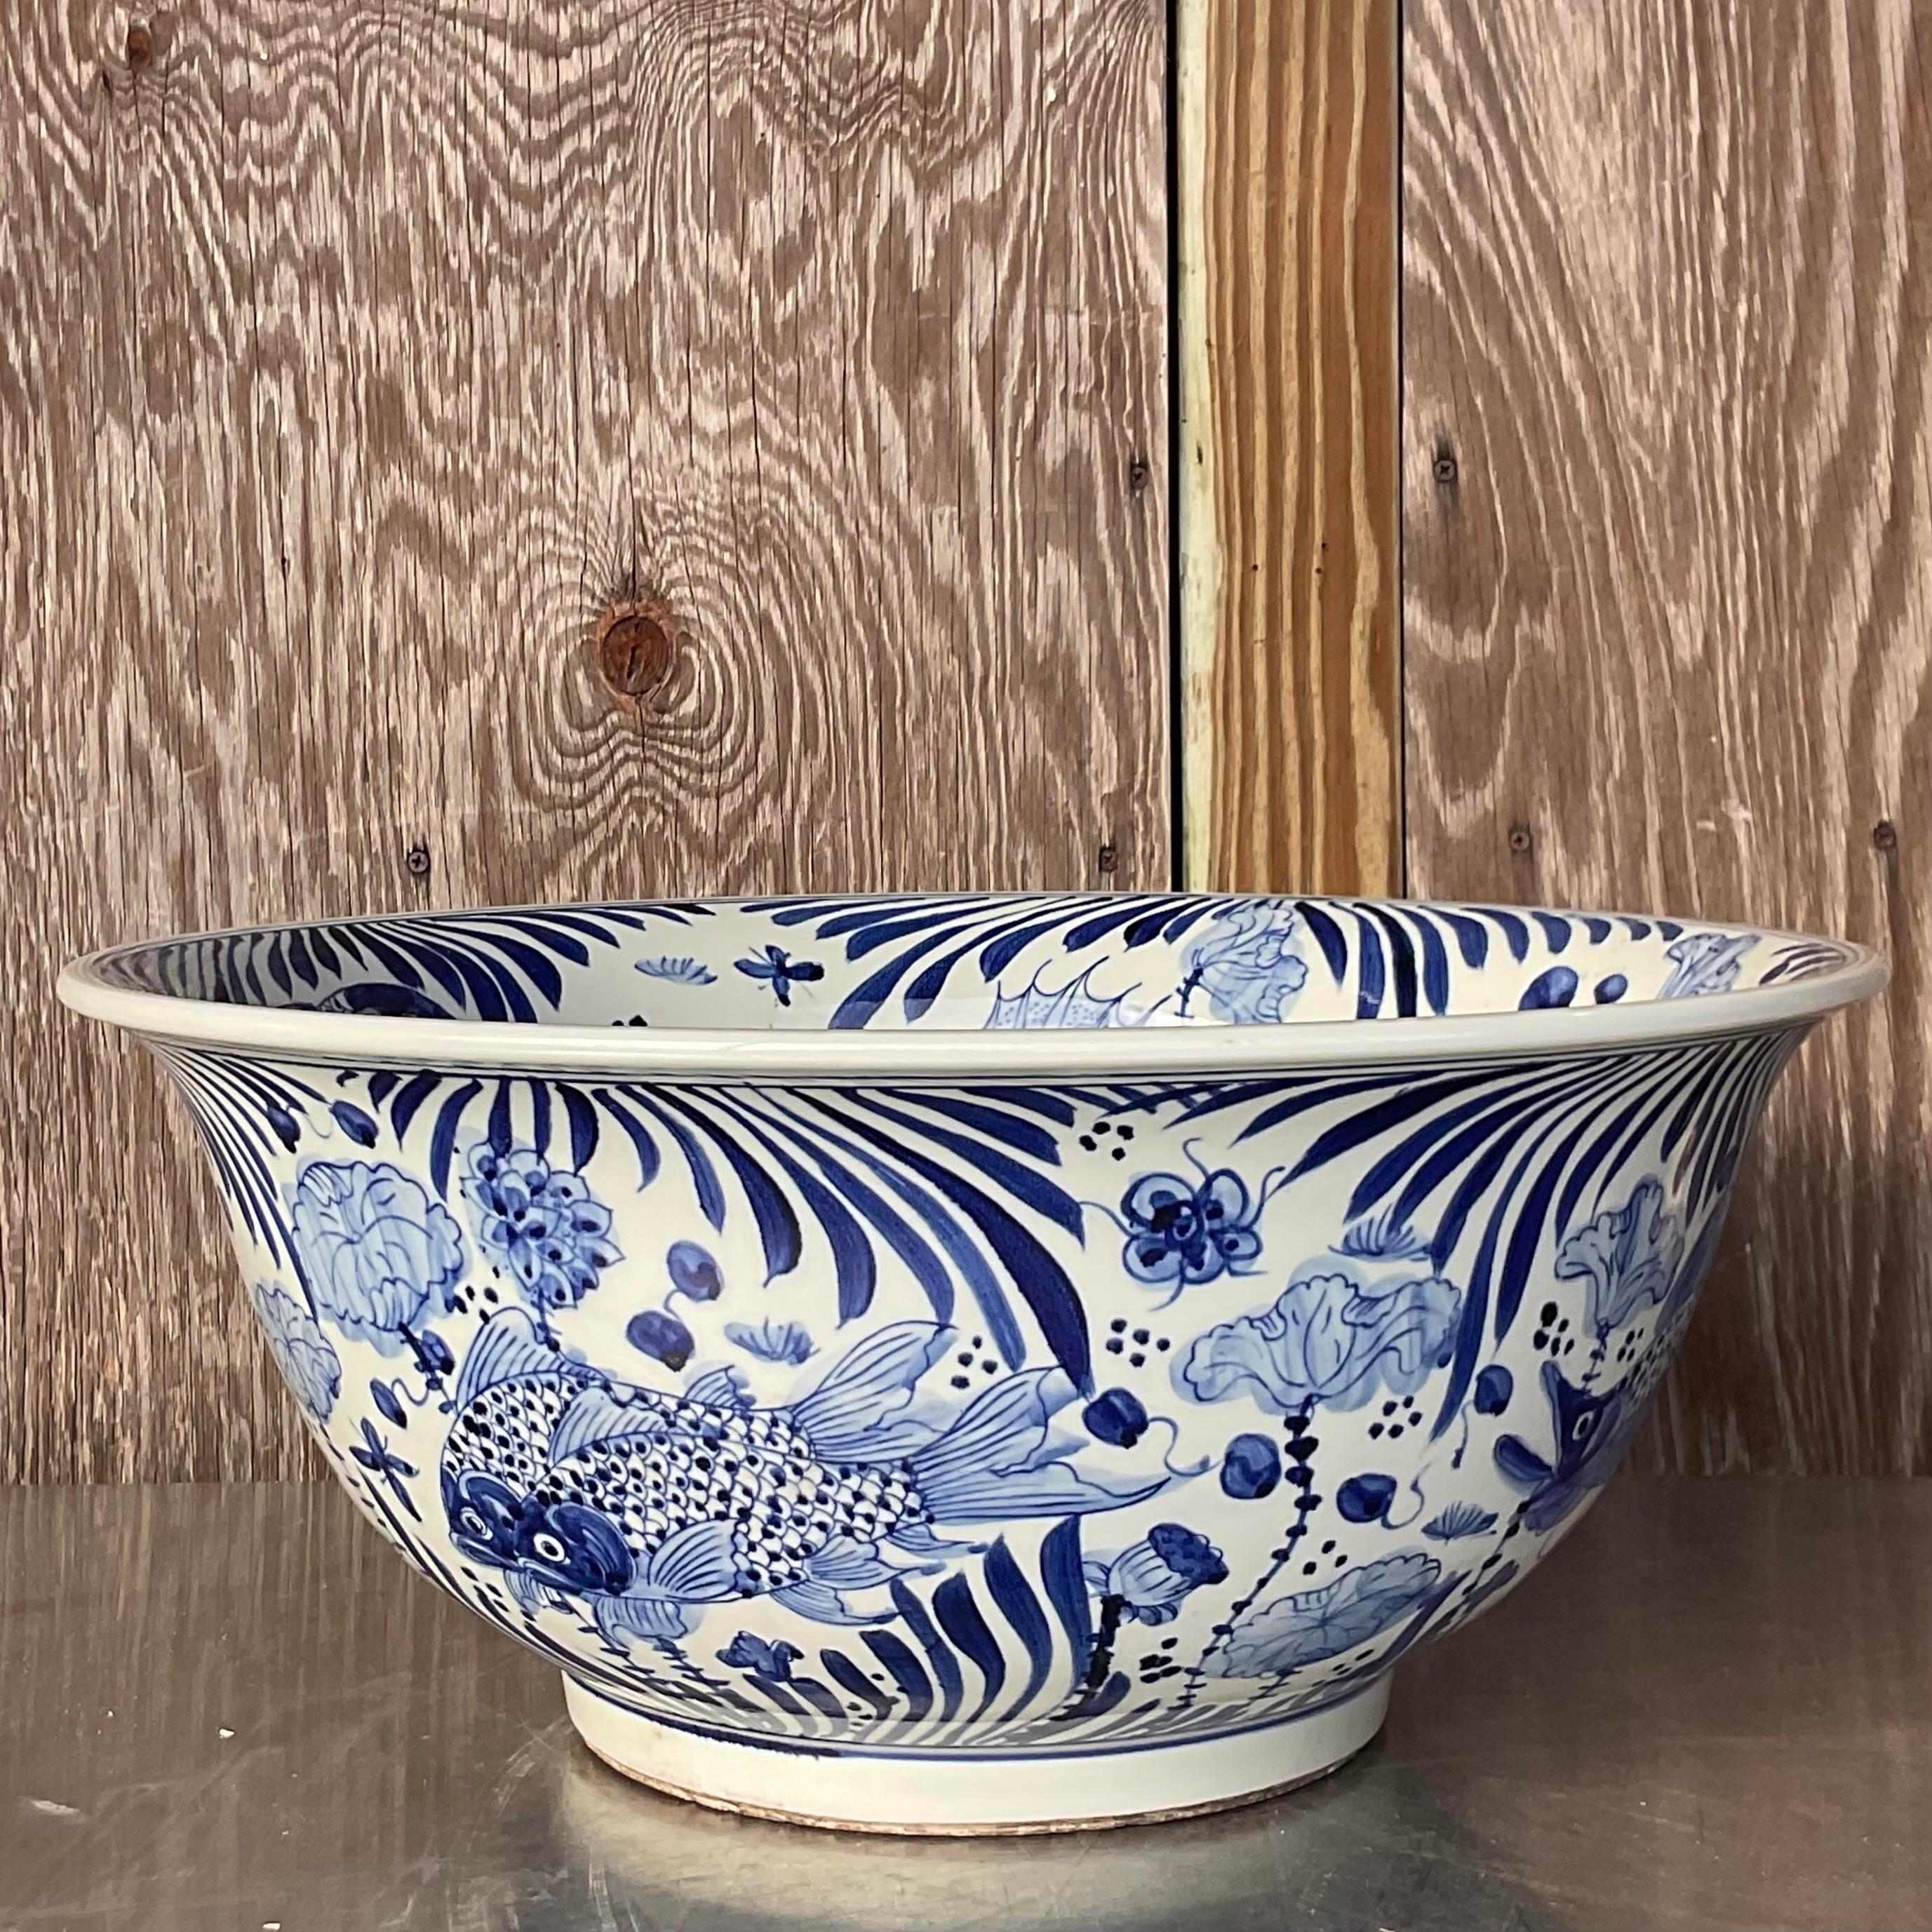 An absolutely stunning vintage white ceramic bowl with blue detailing painted on it. The bowls interior is painted with a beautiful oceanic scenery and creatures. Acquired at a Palm Beach estate. 
